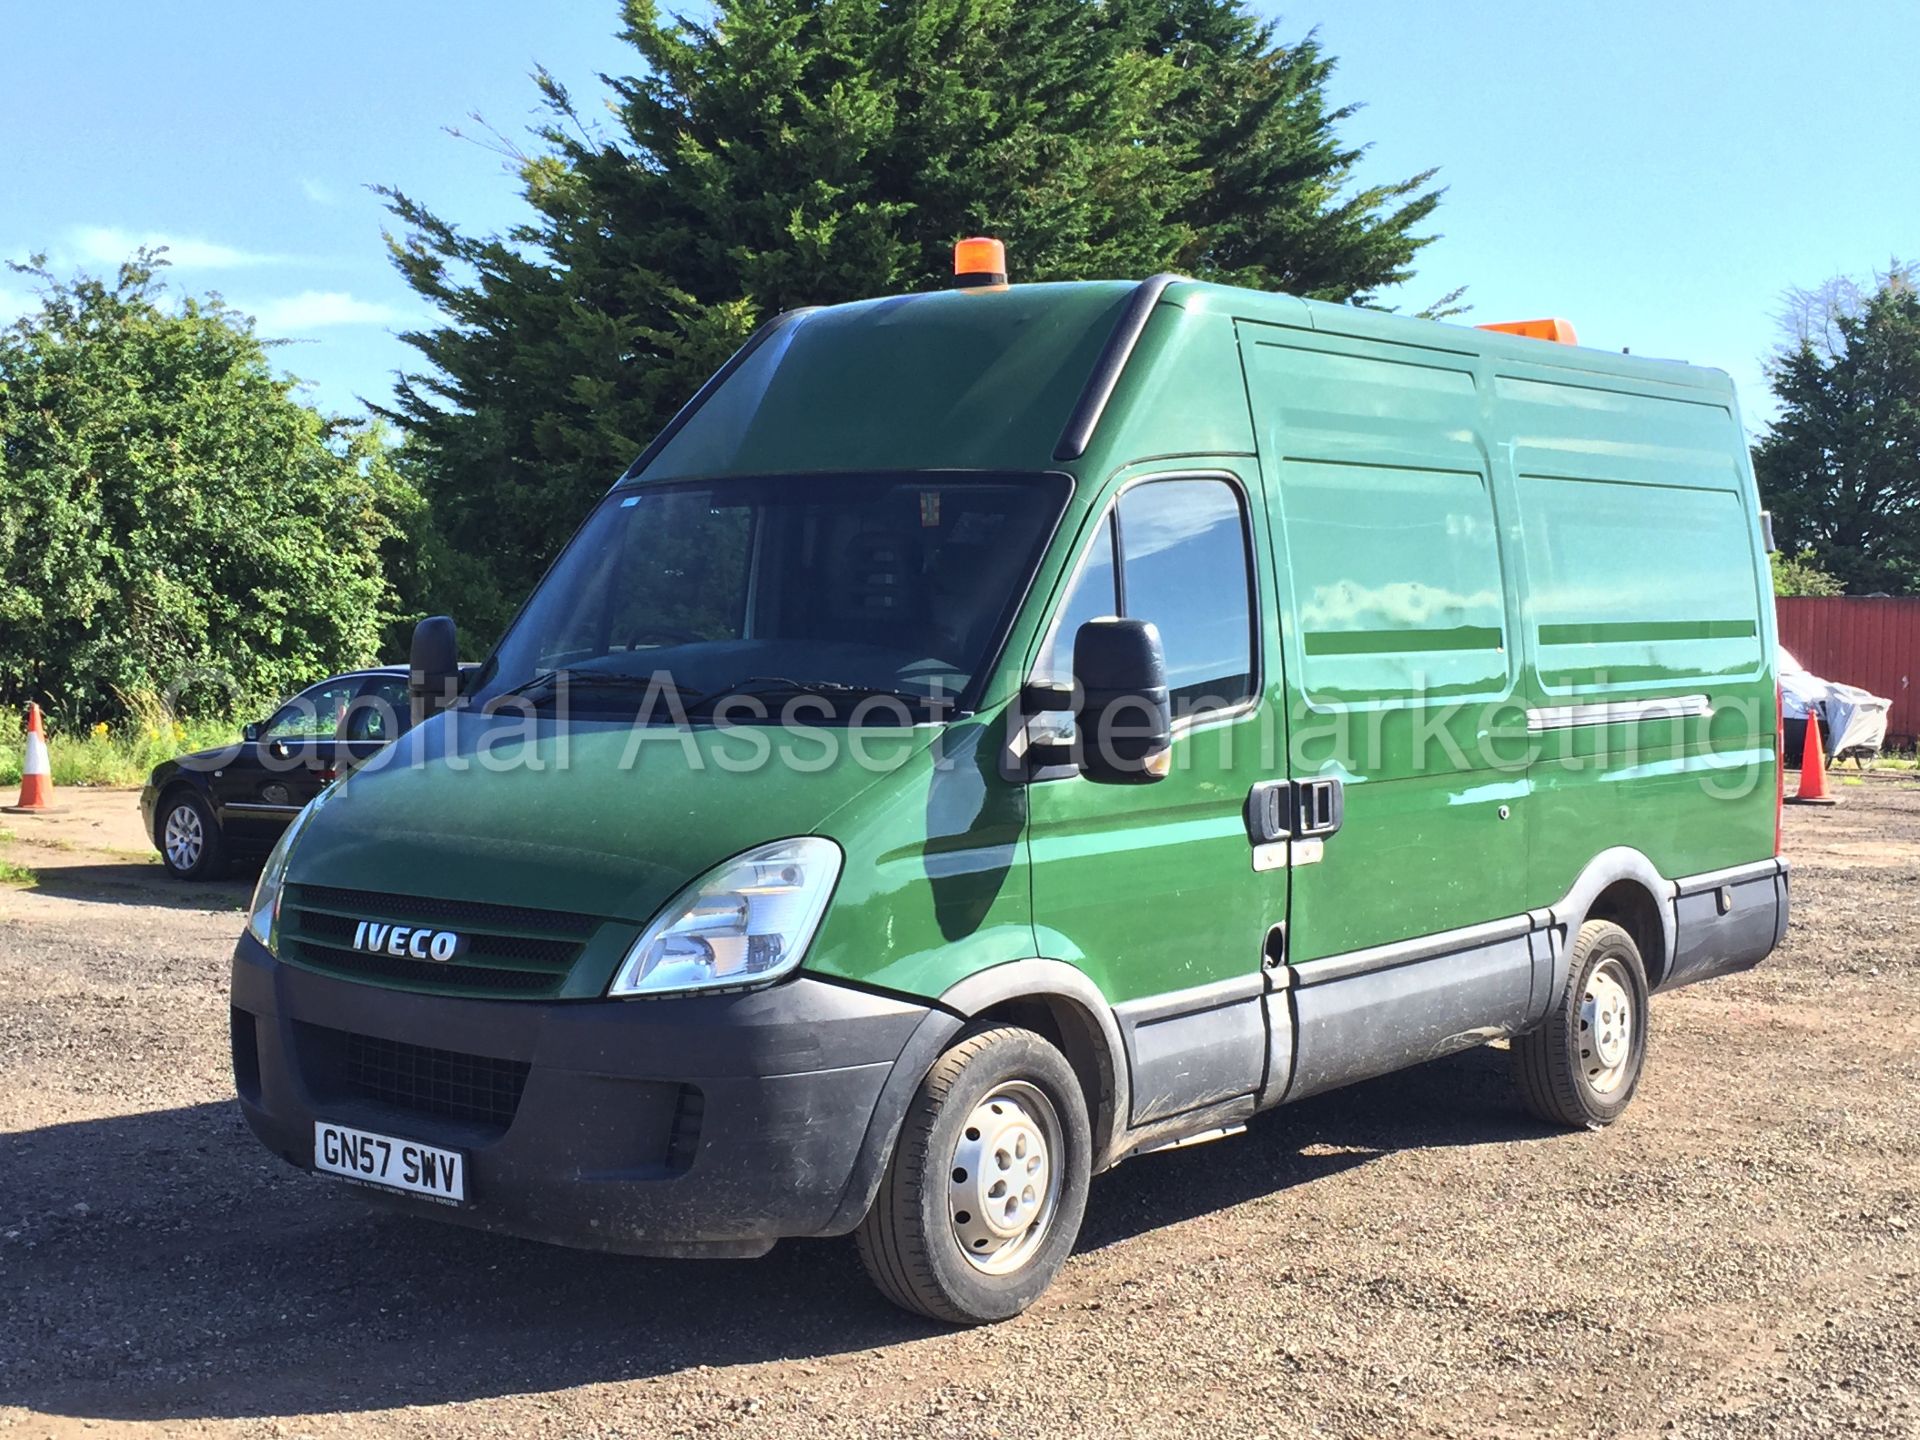 IVECO DAILY 35S12 'MWB HI-ROOF' (2008 MODEL) '2.3 DIESEL' (1 COMPANY OWNER FROM NEW)